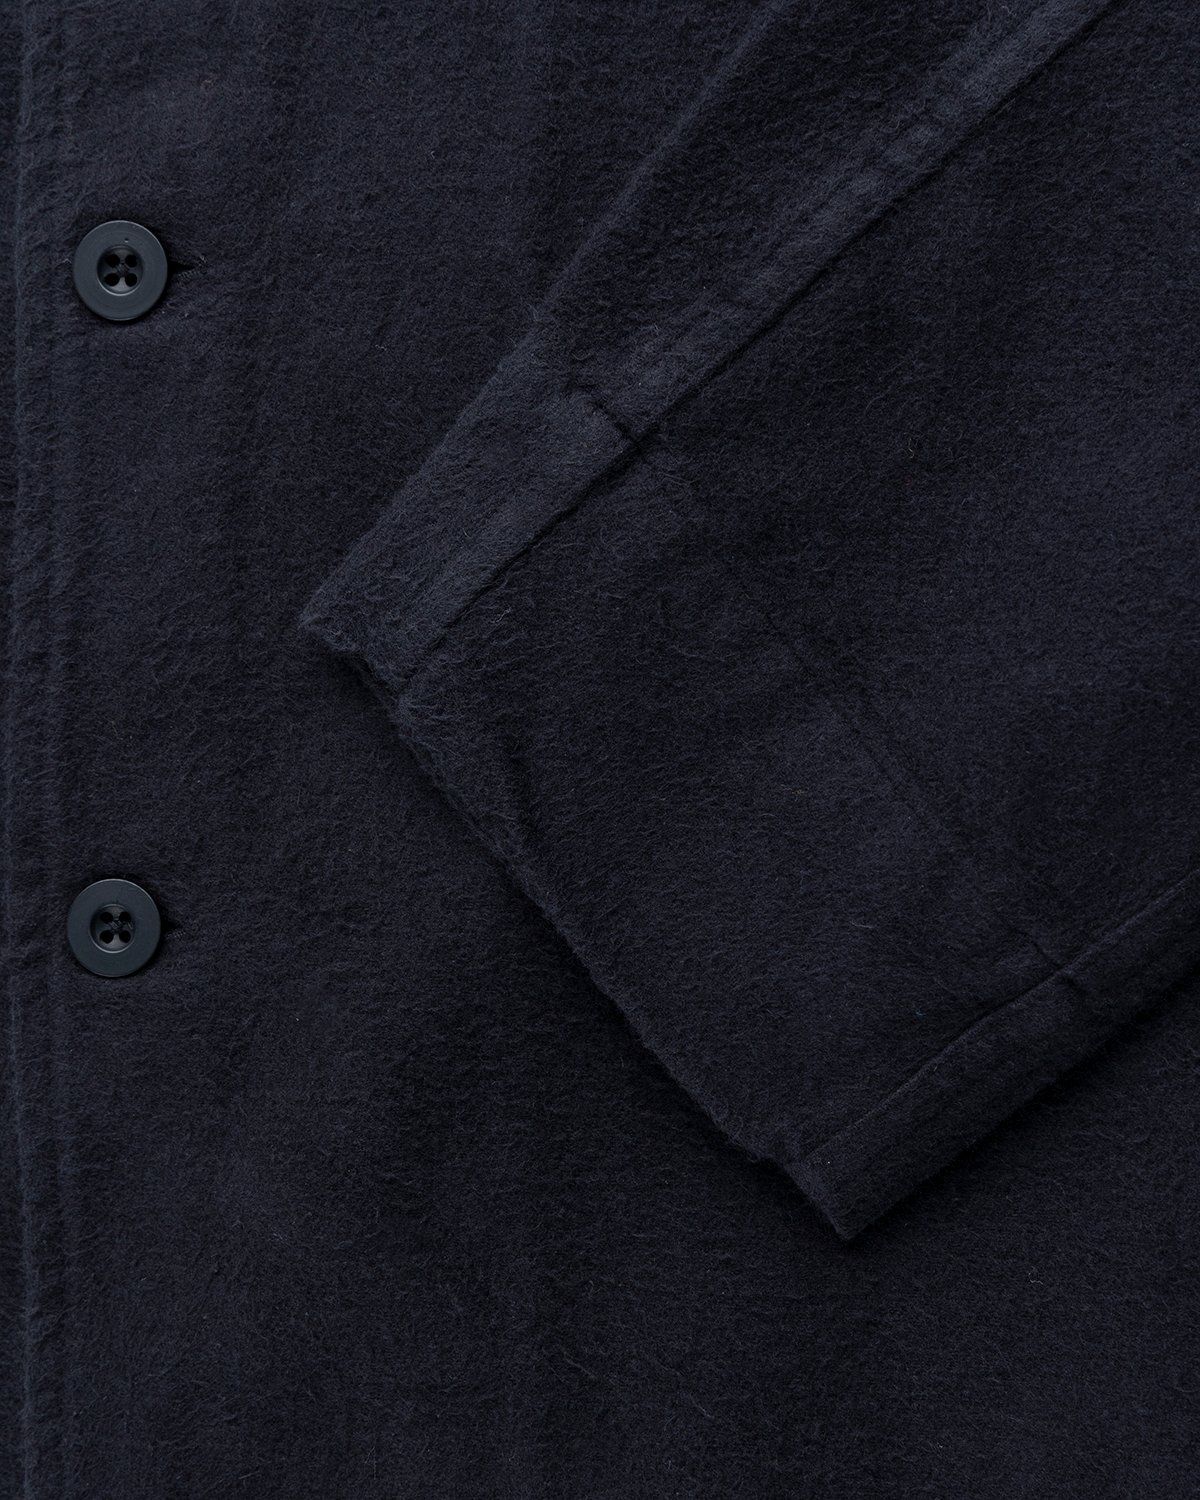 Our Legacy – Evening Coach Jacket Black Brushed - Outerwear - Black - Image 4